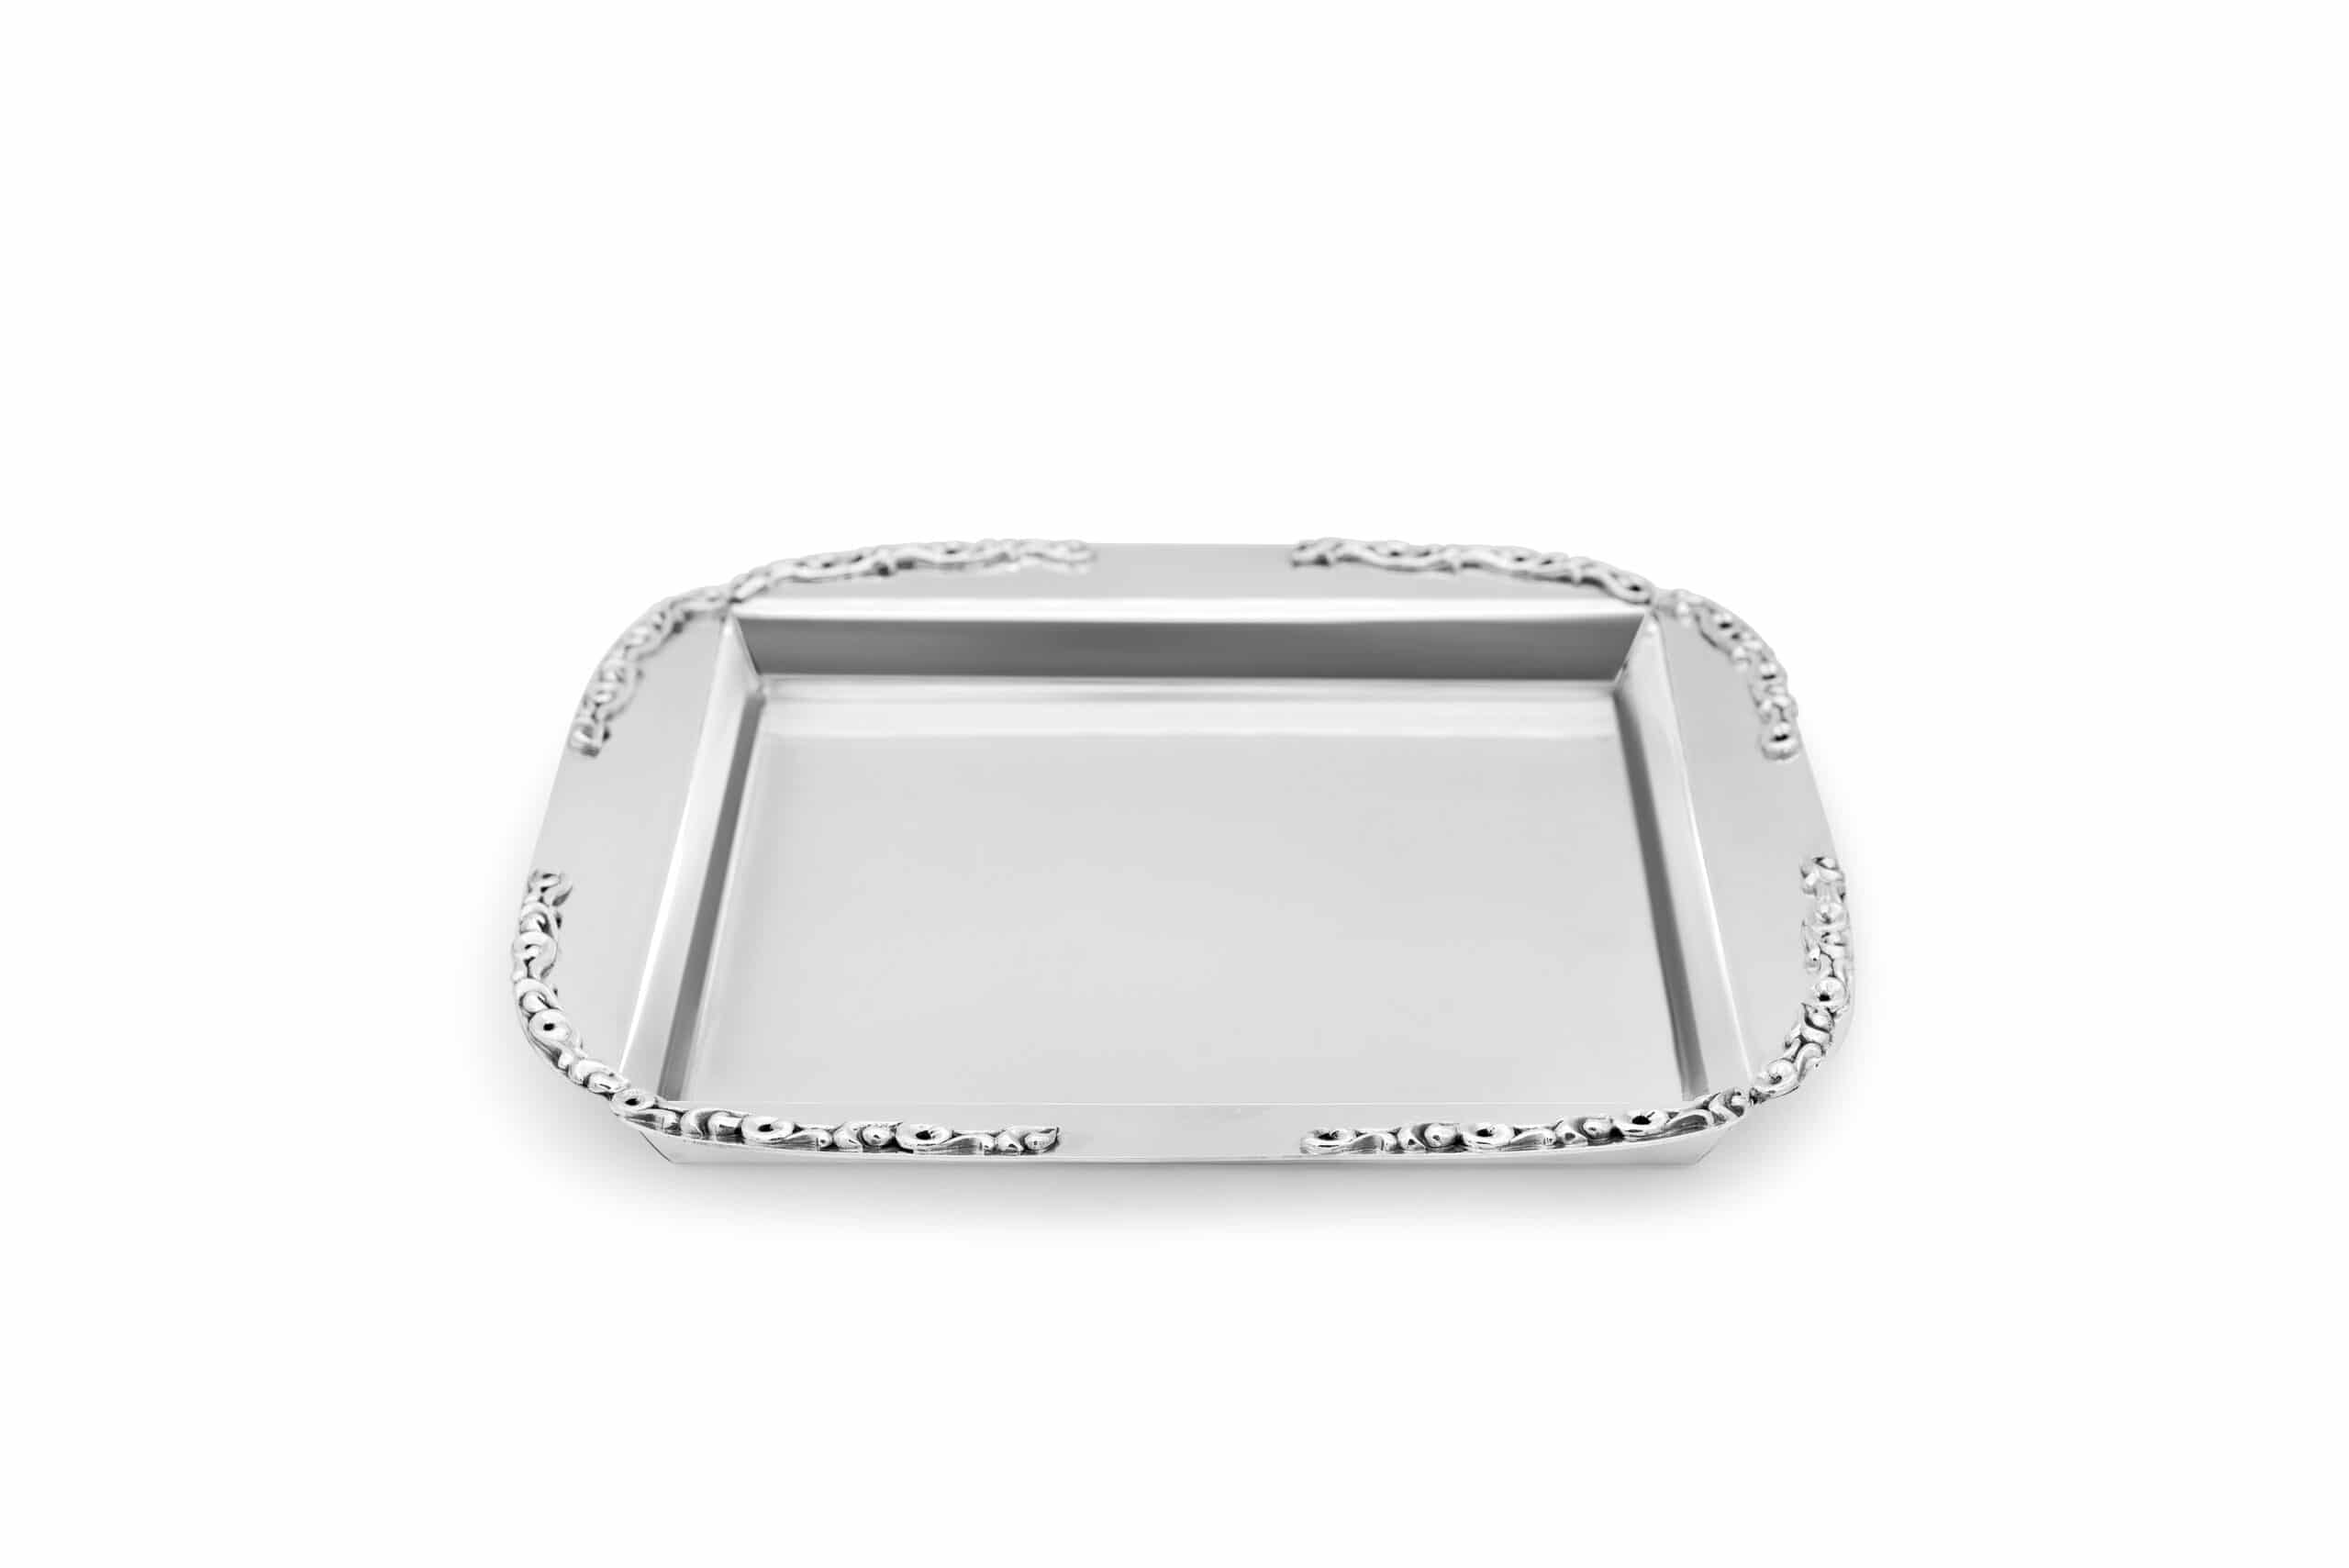 Stunning Sterling Silver Tray for Candlesticks